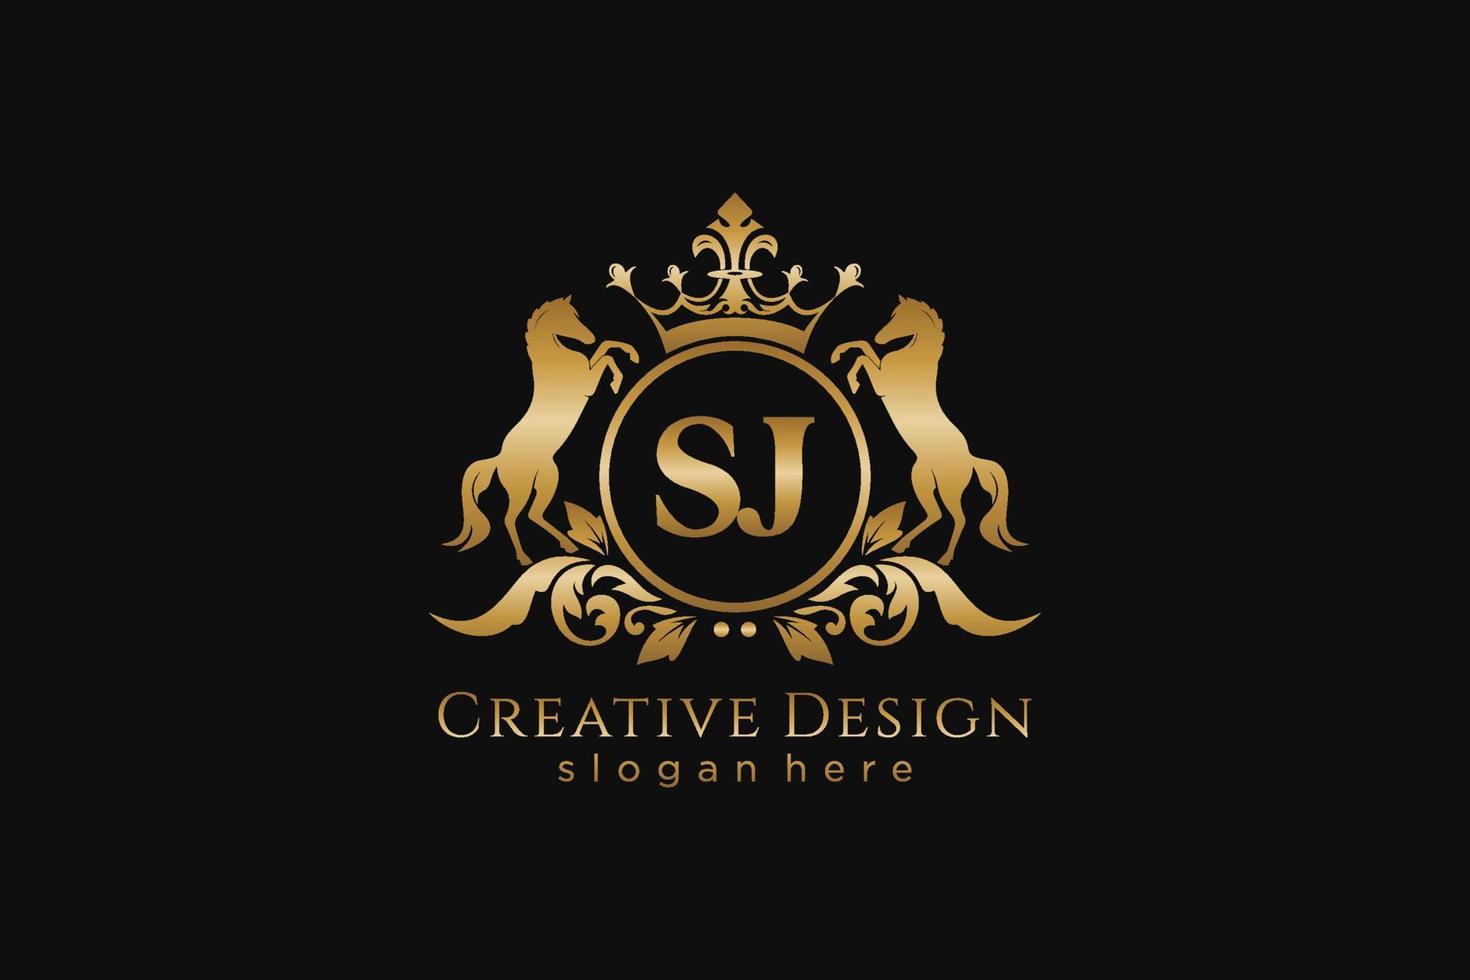 initial SJ Retro golden crest with circle and two horses, badge template with scrolls and royal crown - perfect for luxurious branding projects vector